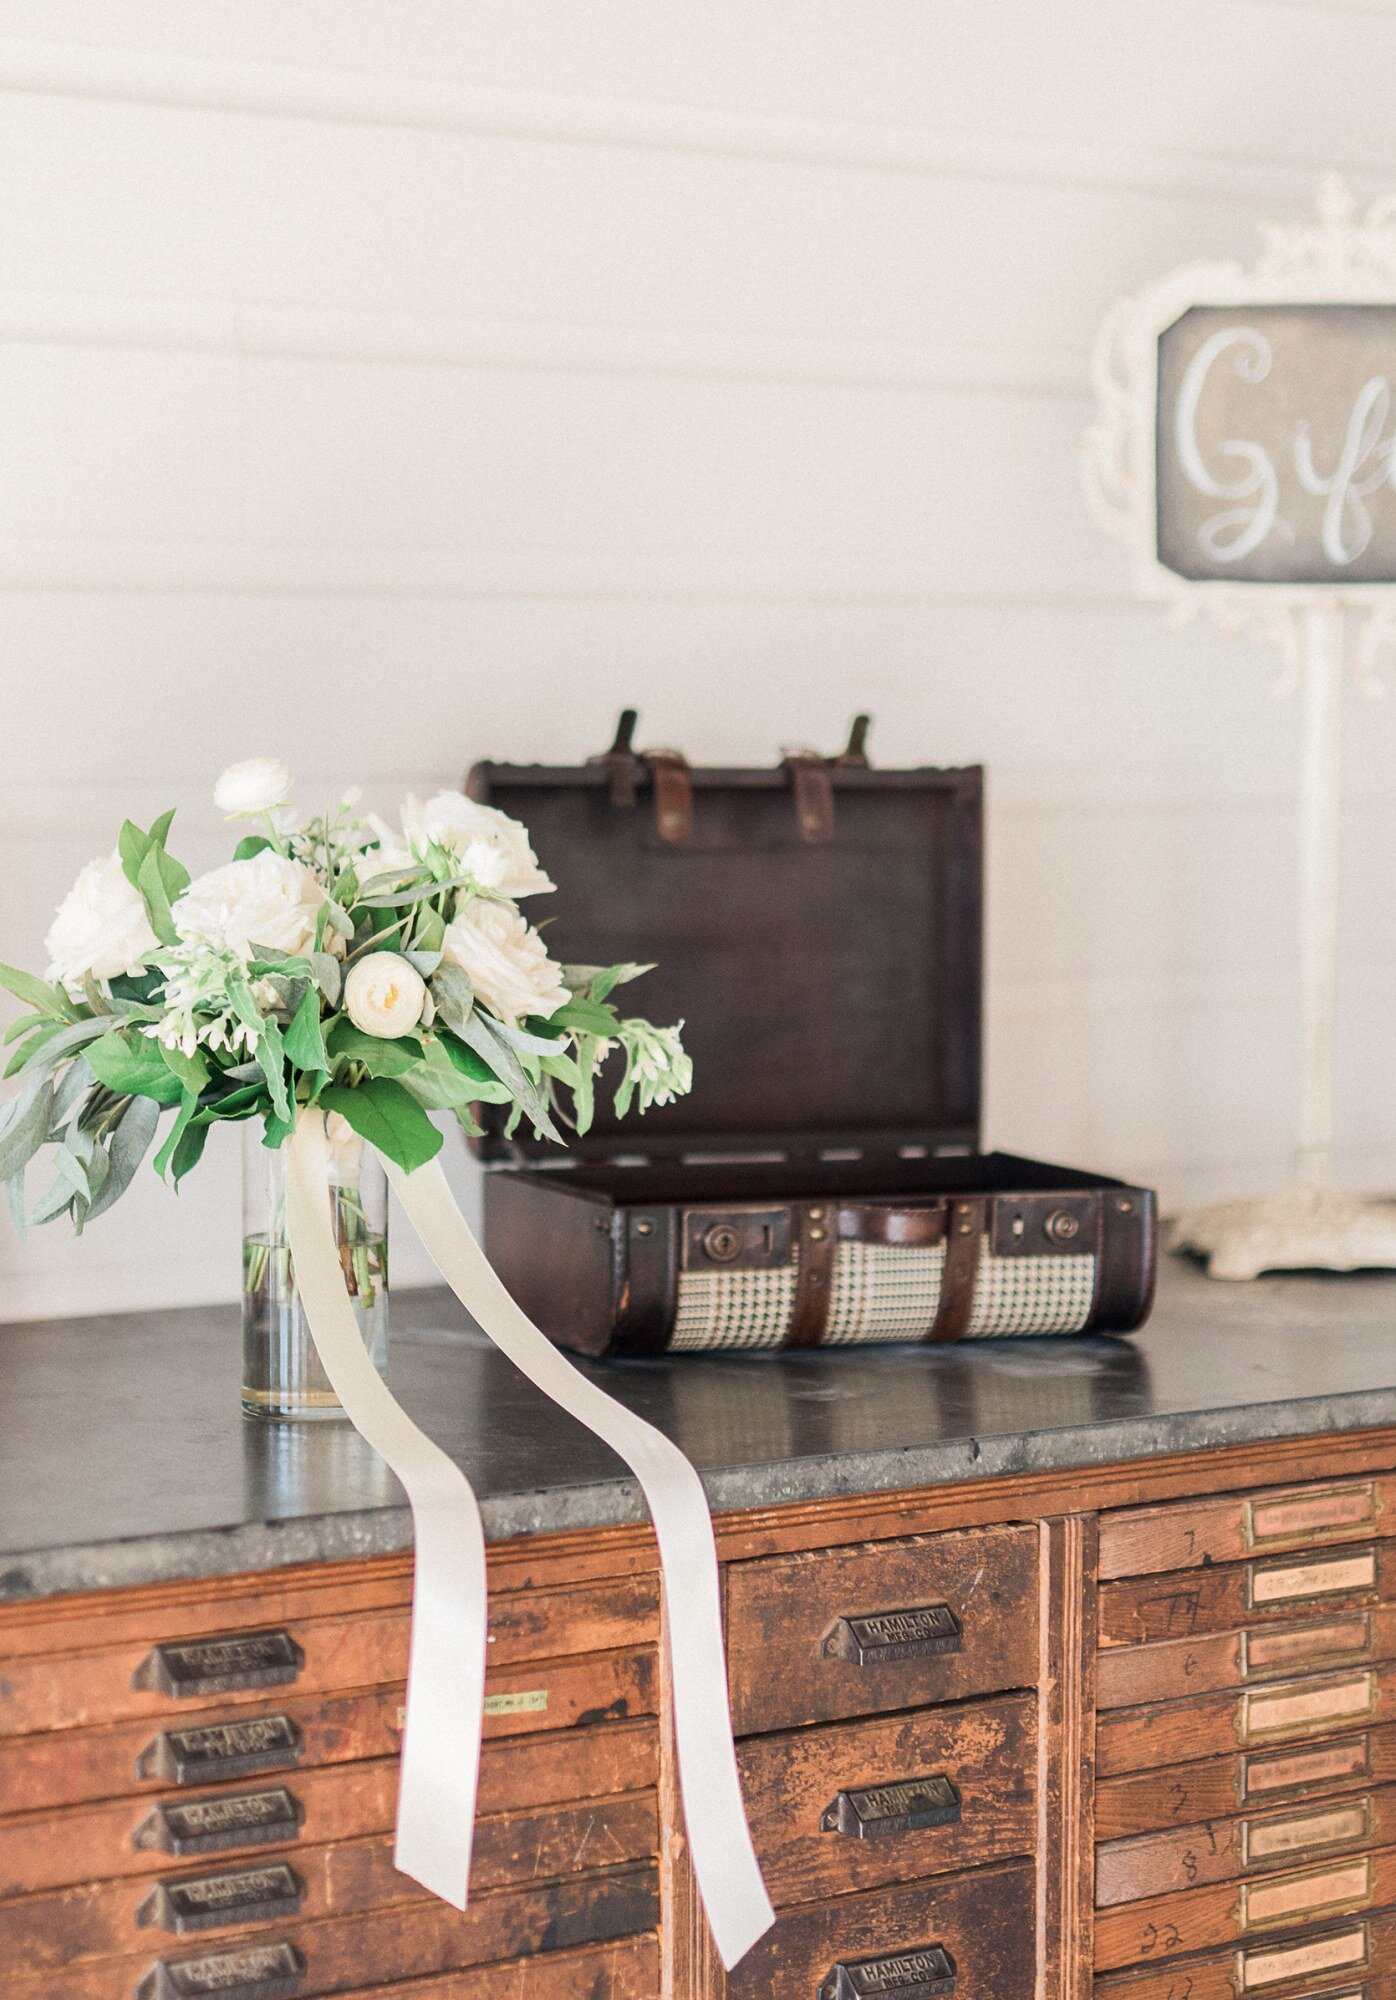 Vintage Suitcase For Cards | $0